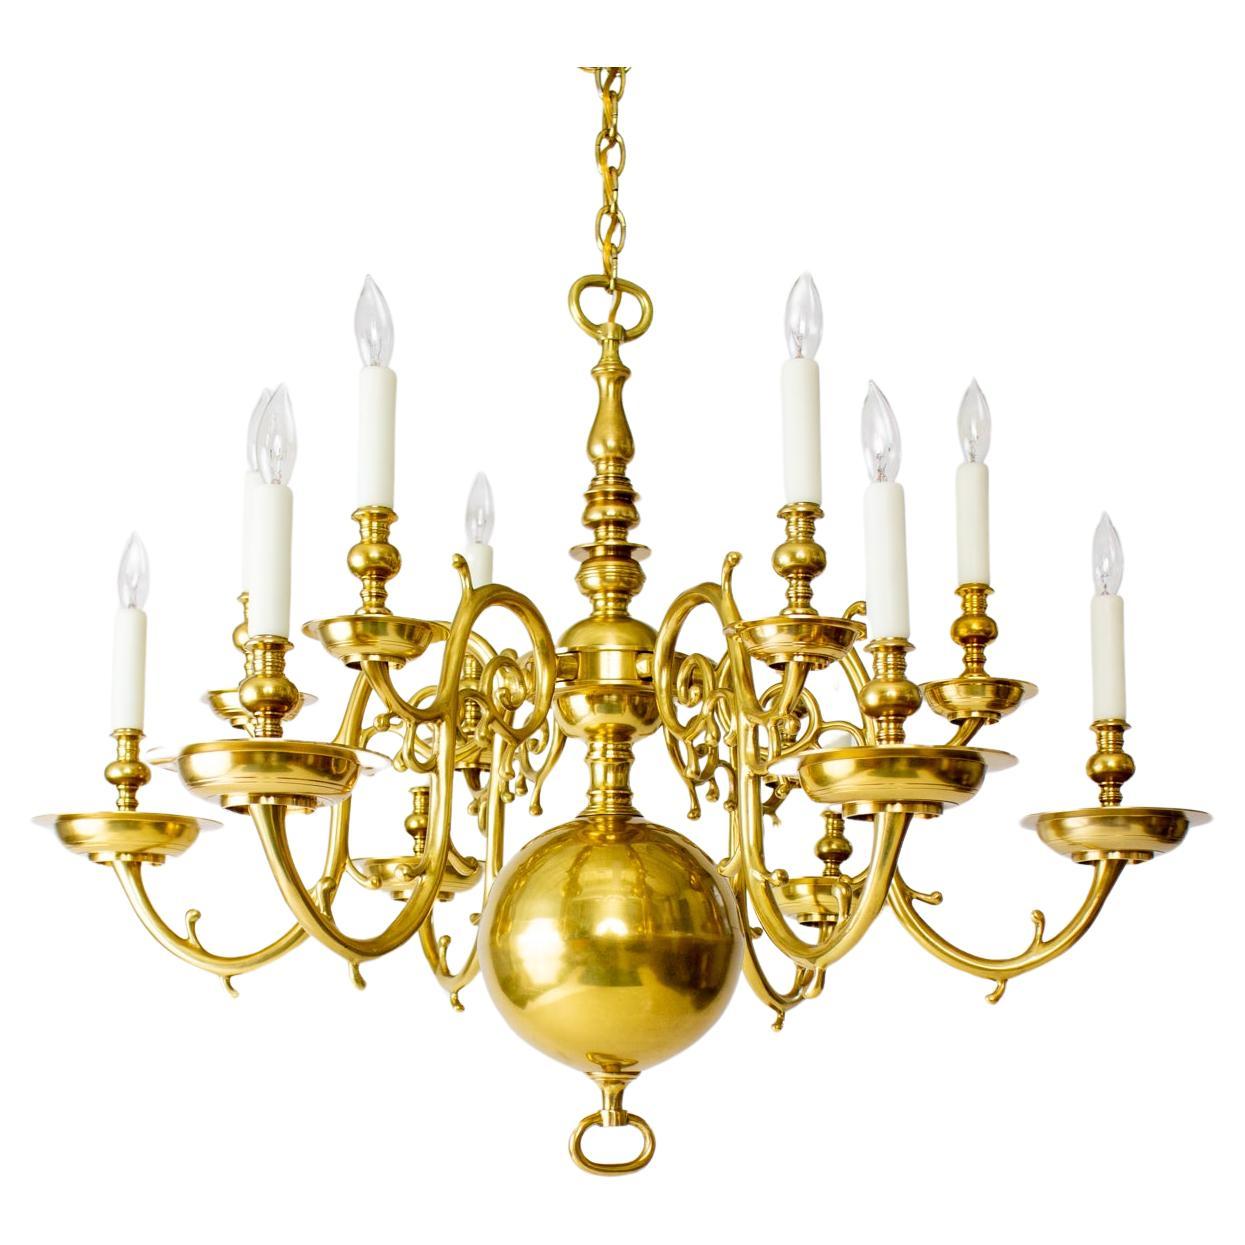 20th Century 12 Arm Dutch Colonial Brass Chandelier For Sale